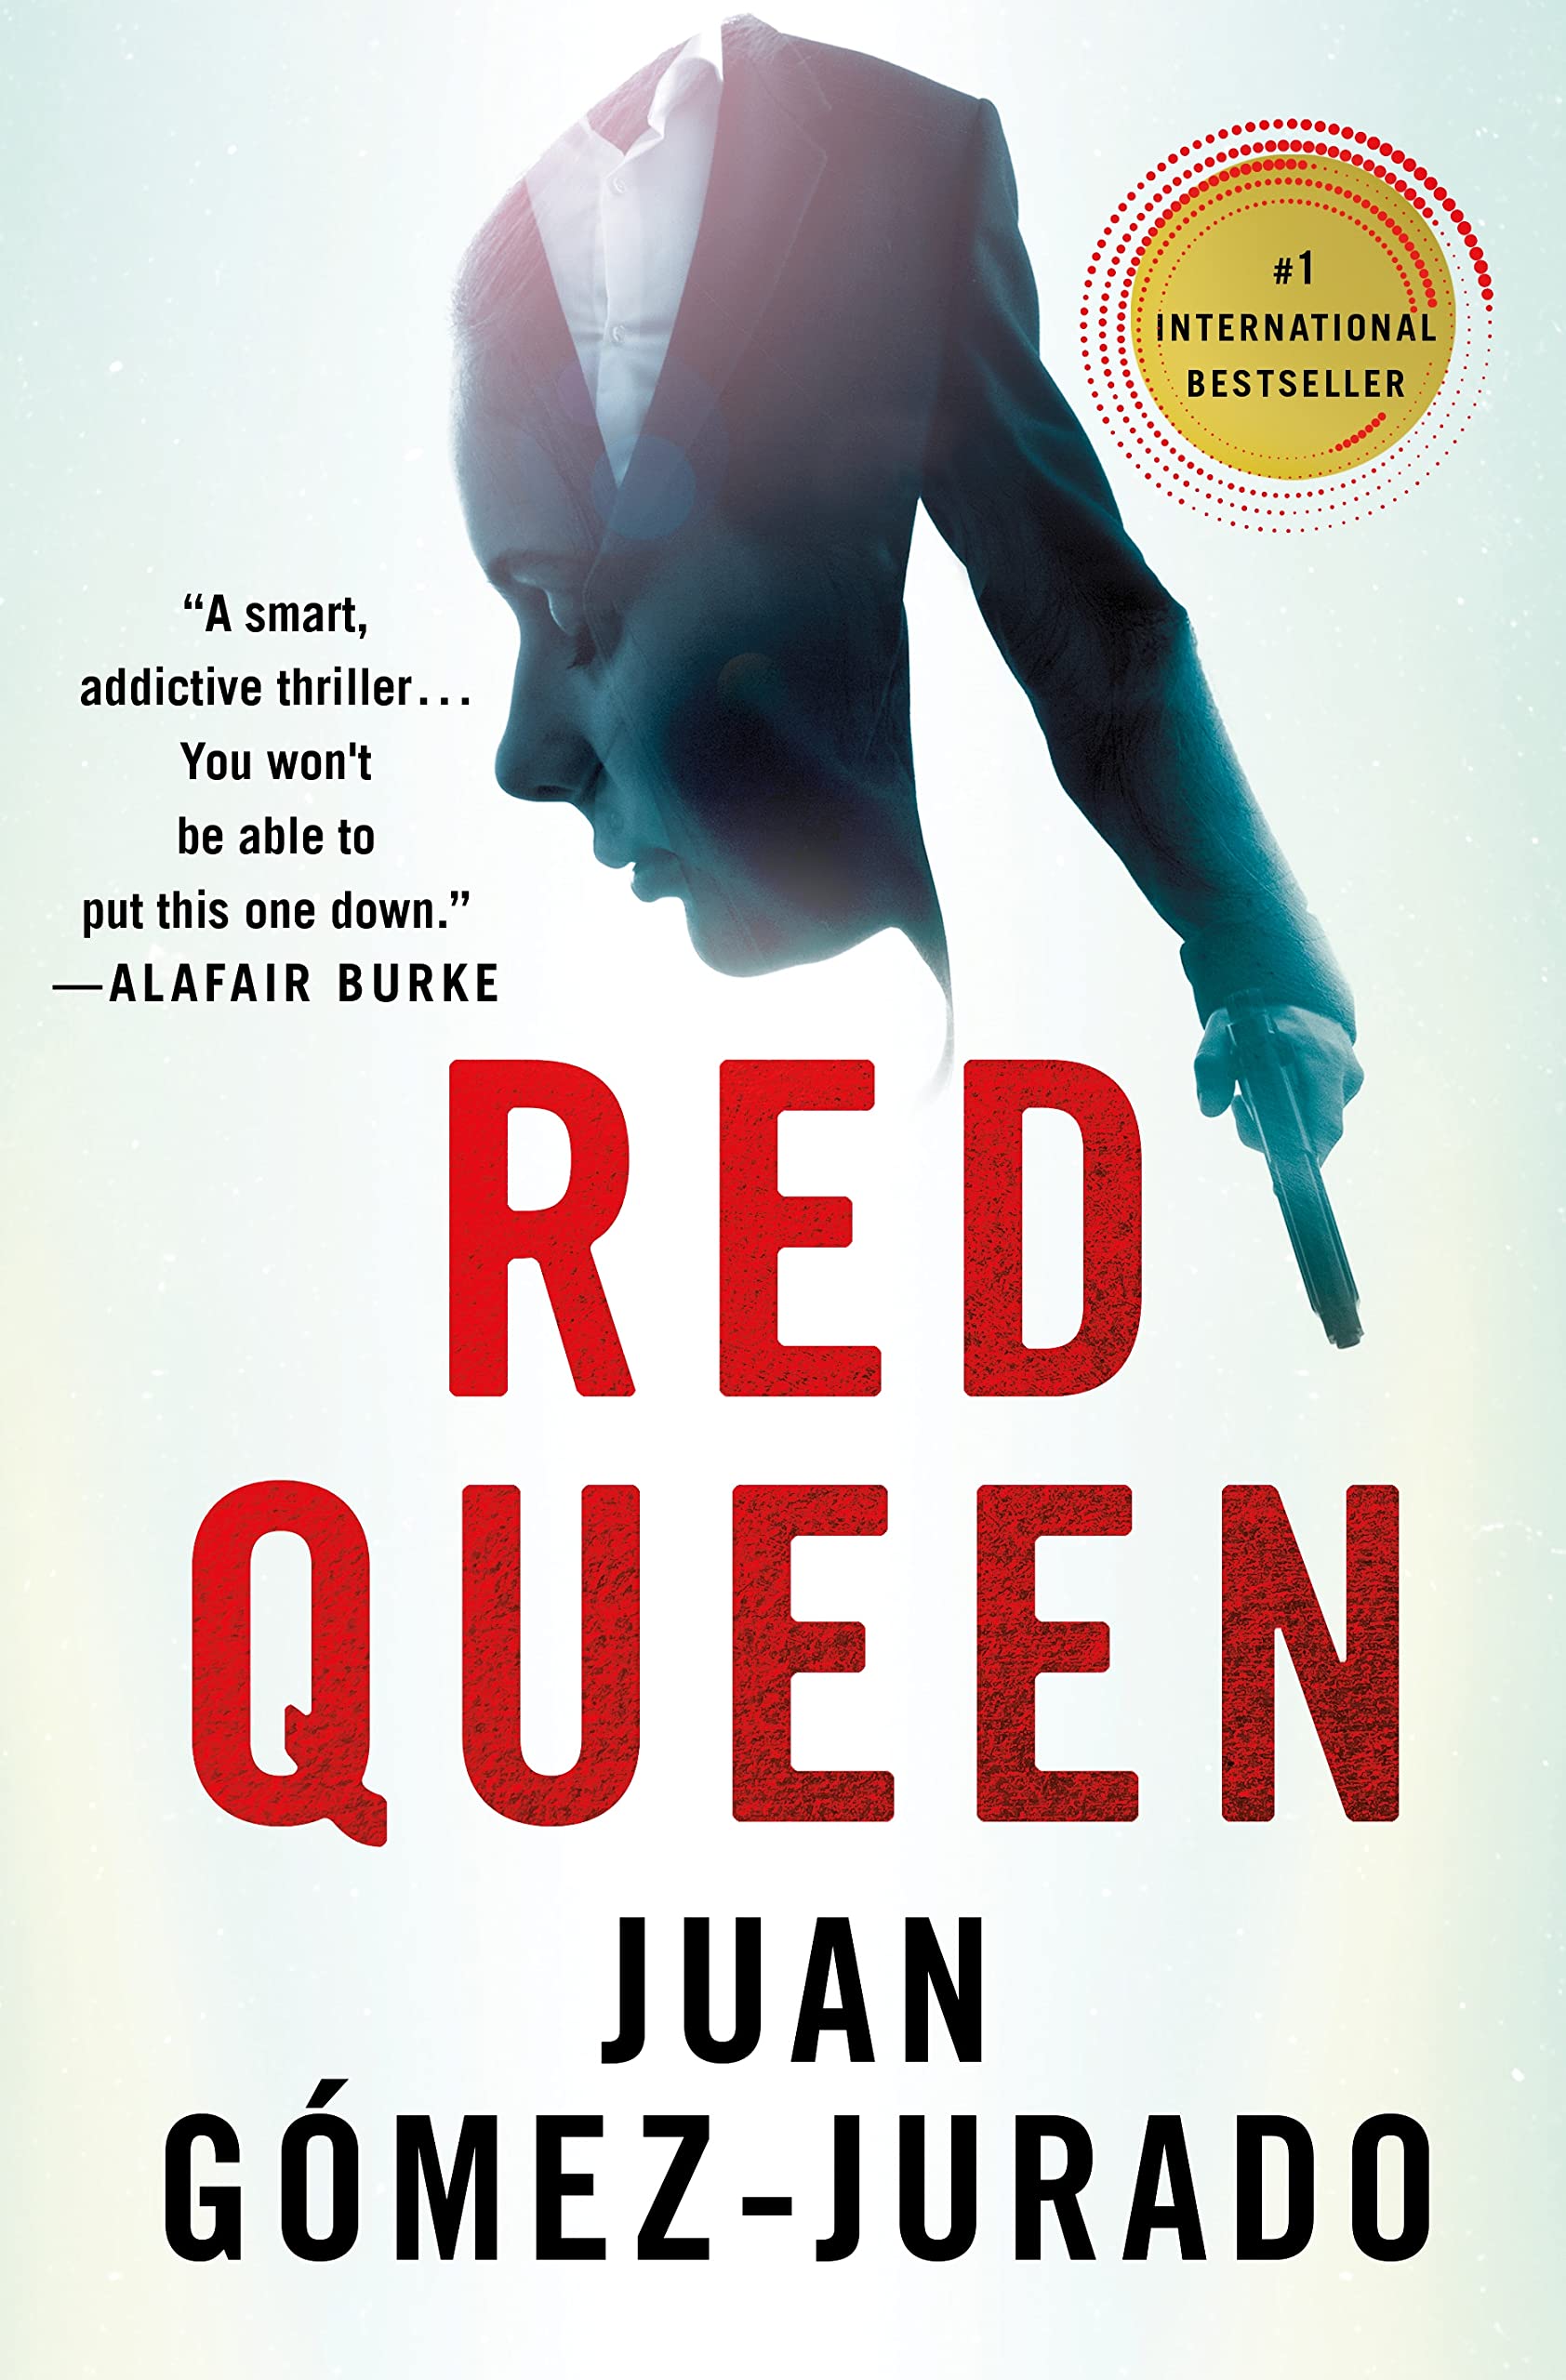 Image for "Red Queen"